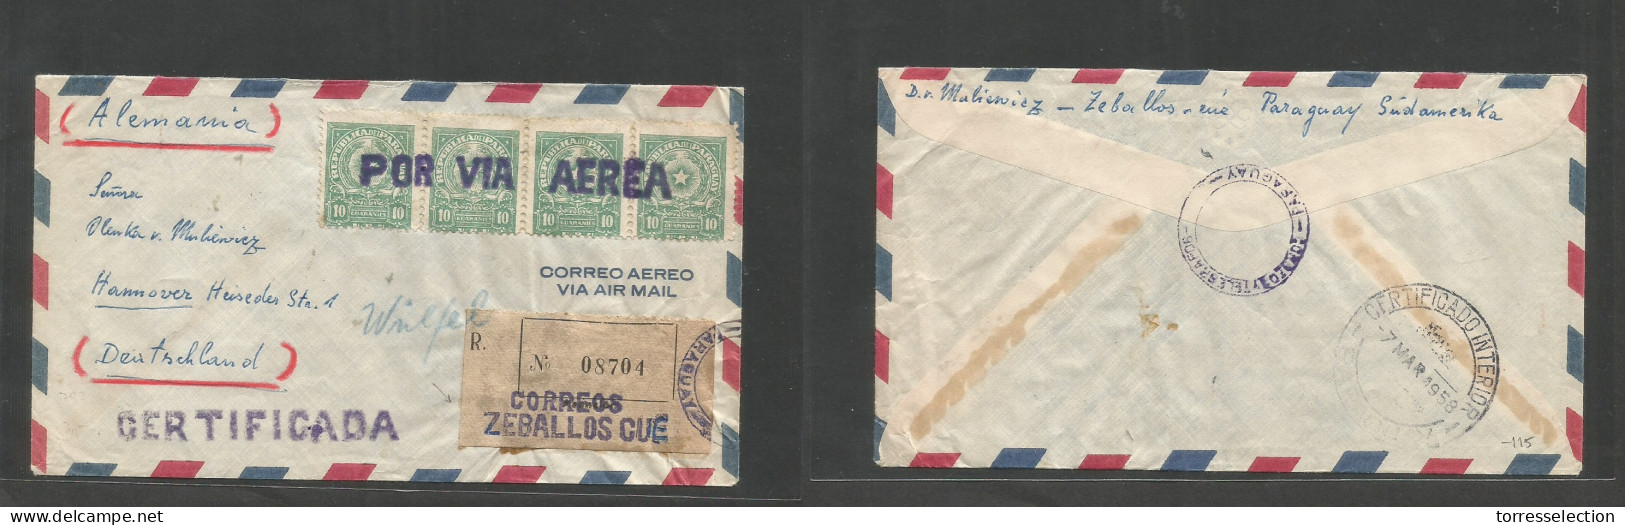 PARAGUAY. 1958 (7 March) Zeballos Qué - Germany, Hannover. Air Registered Multifkd Env + Rare R-label, Tied Violet Cache - Paraguay